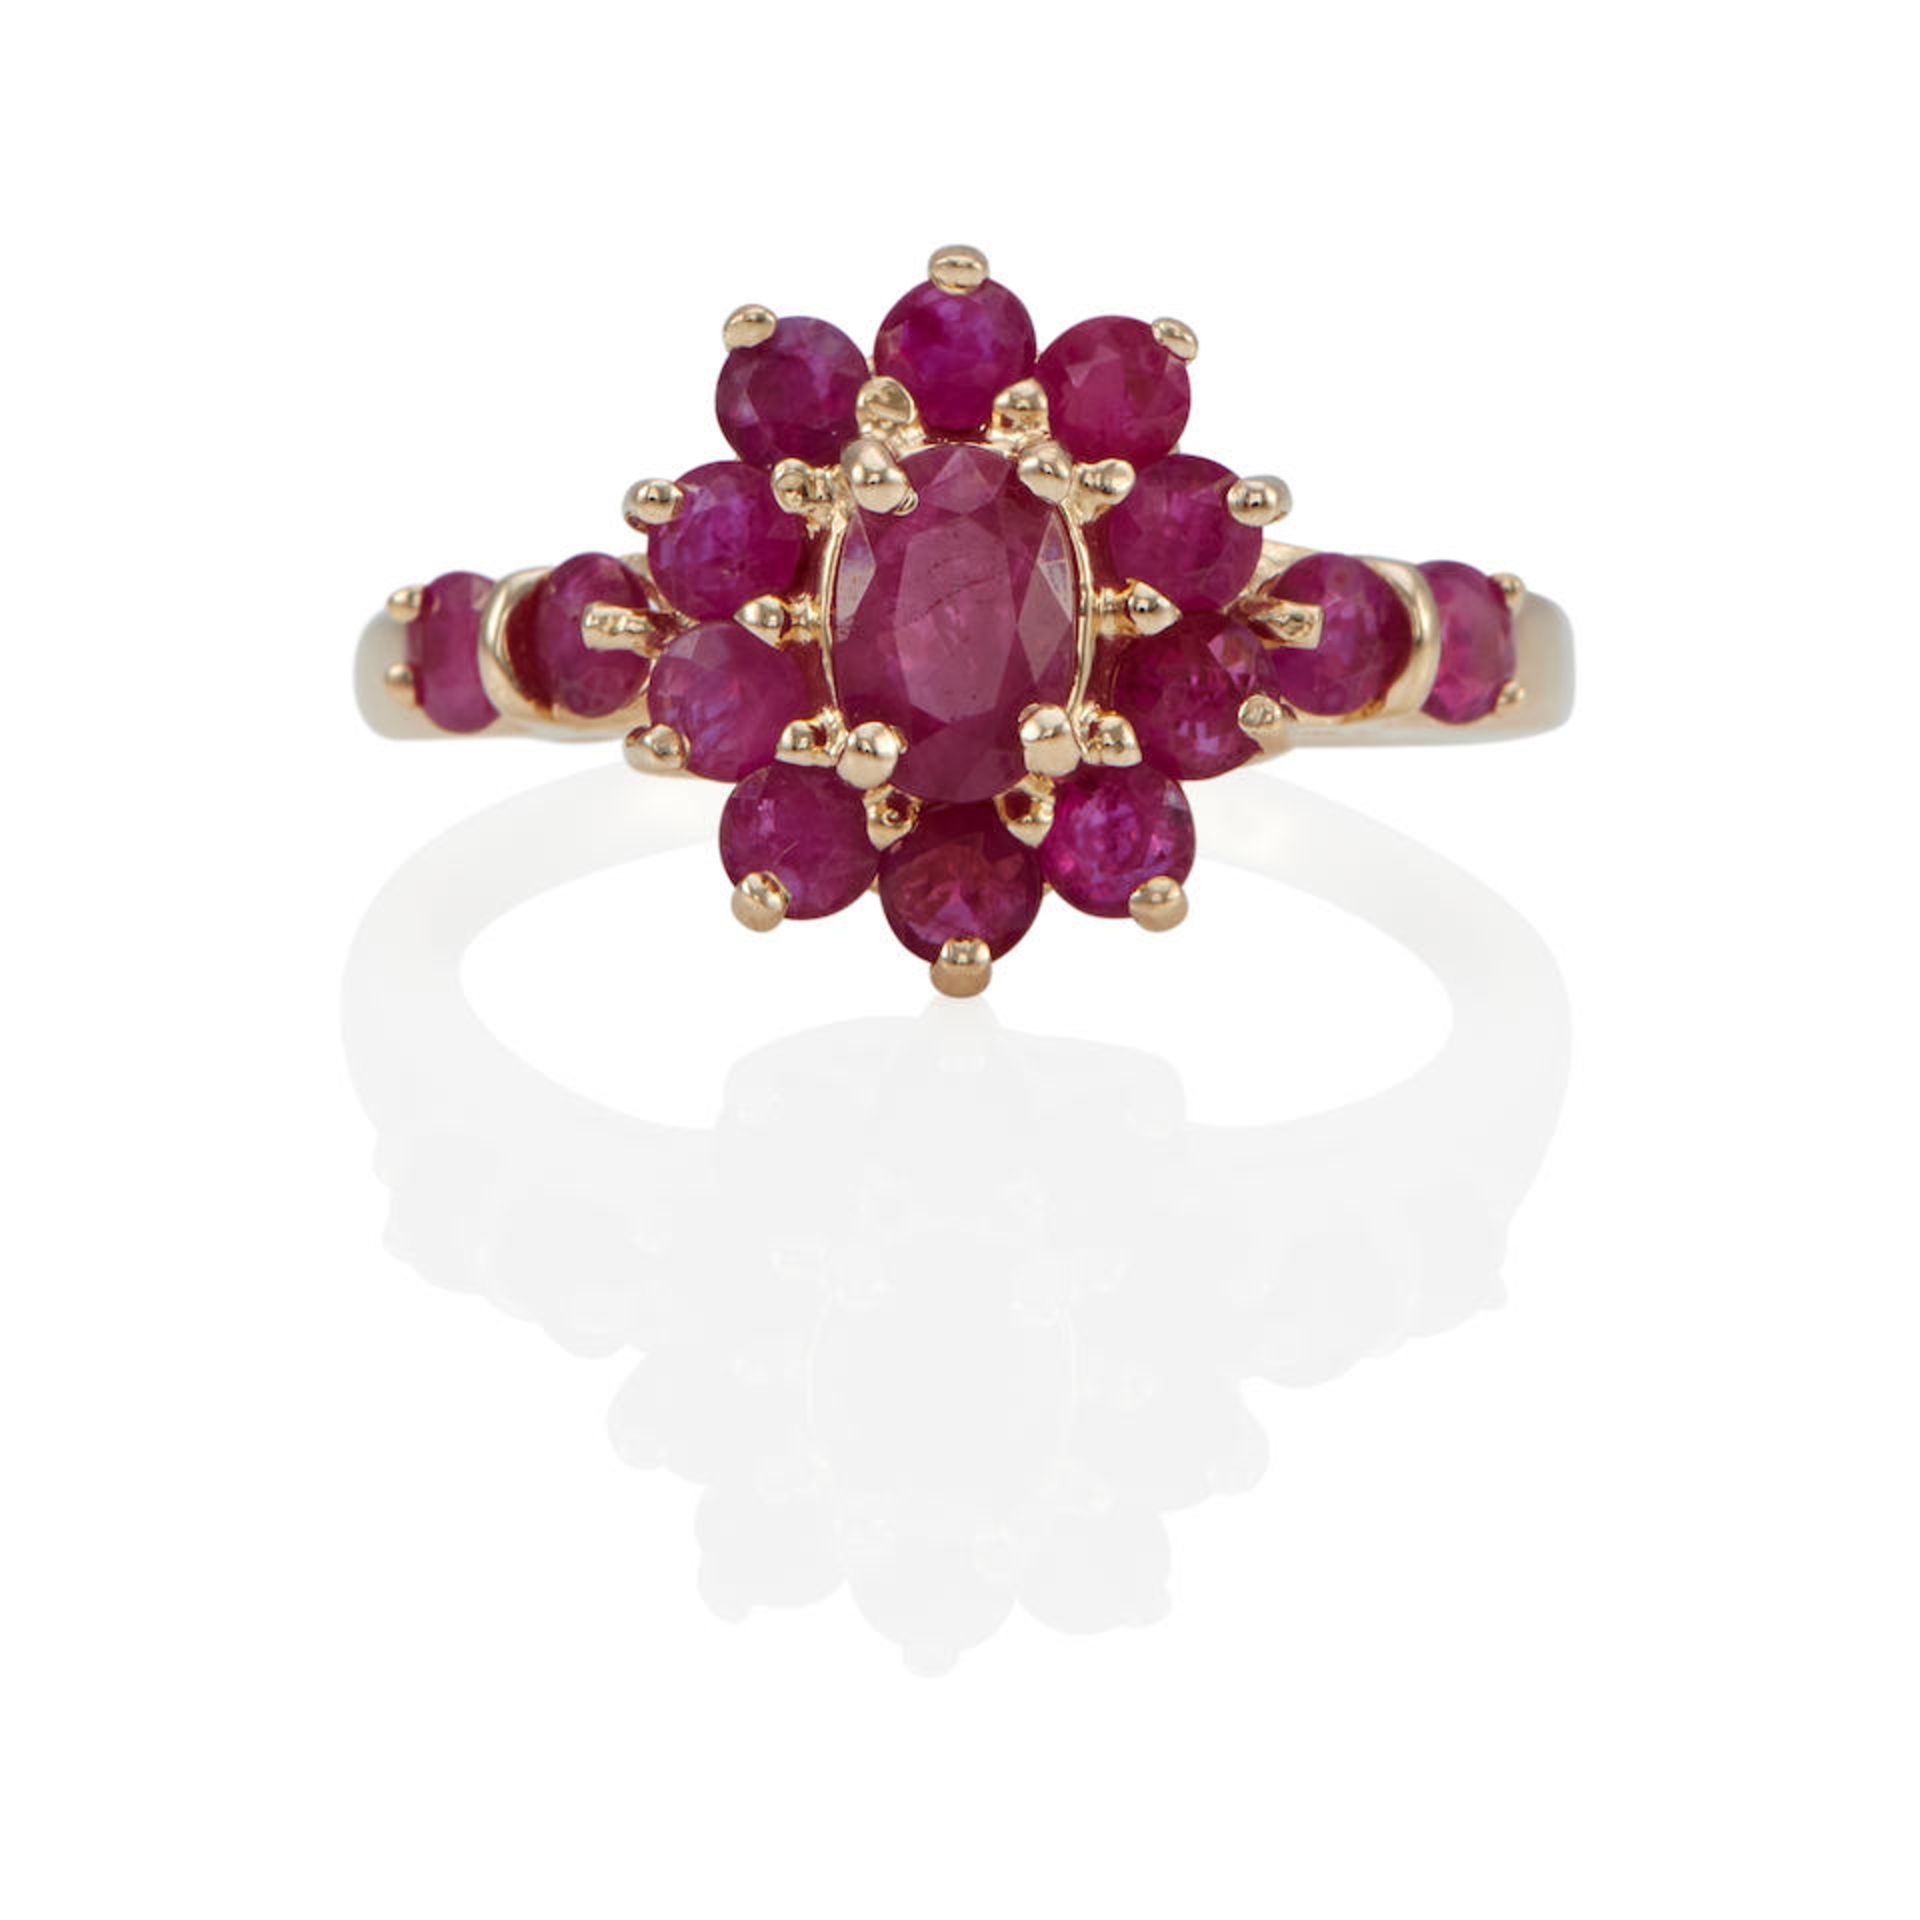 A 14K GOLD AND RUBY RING